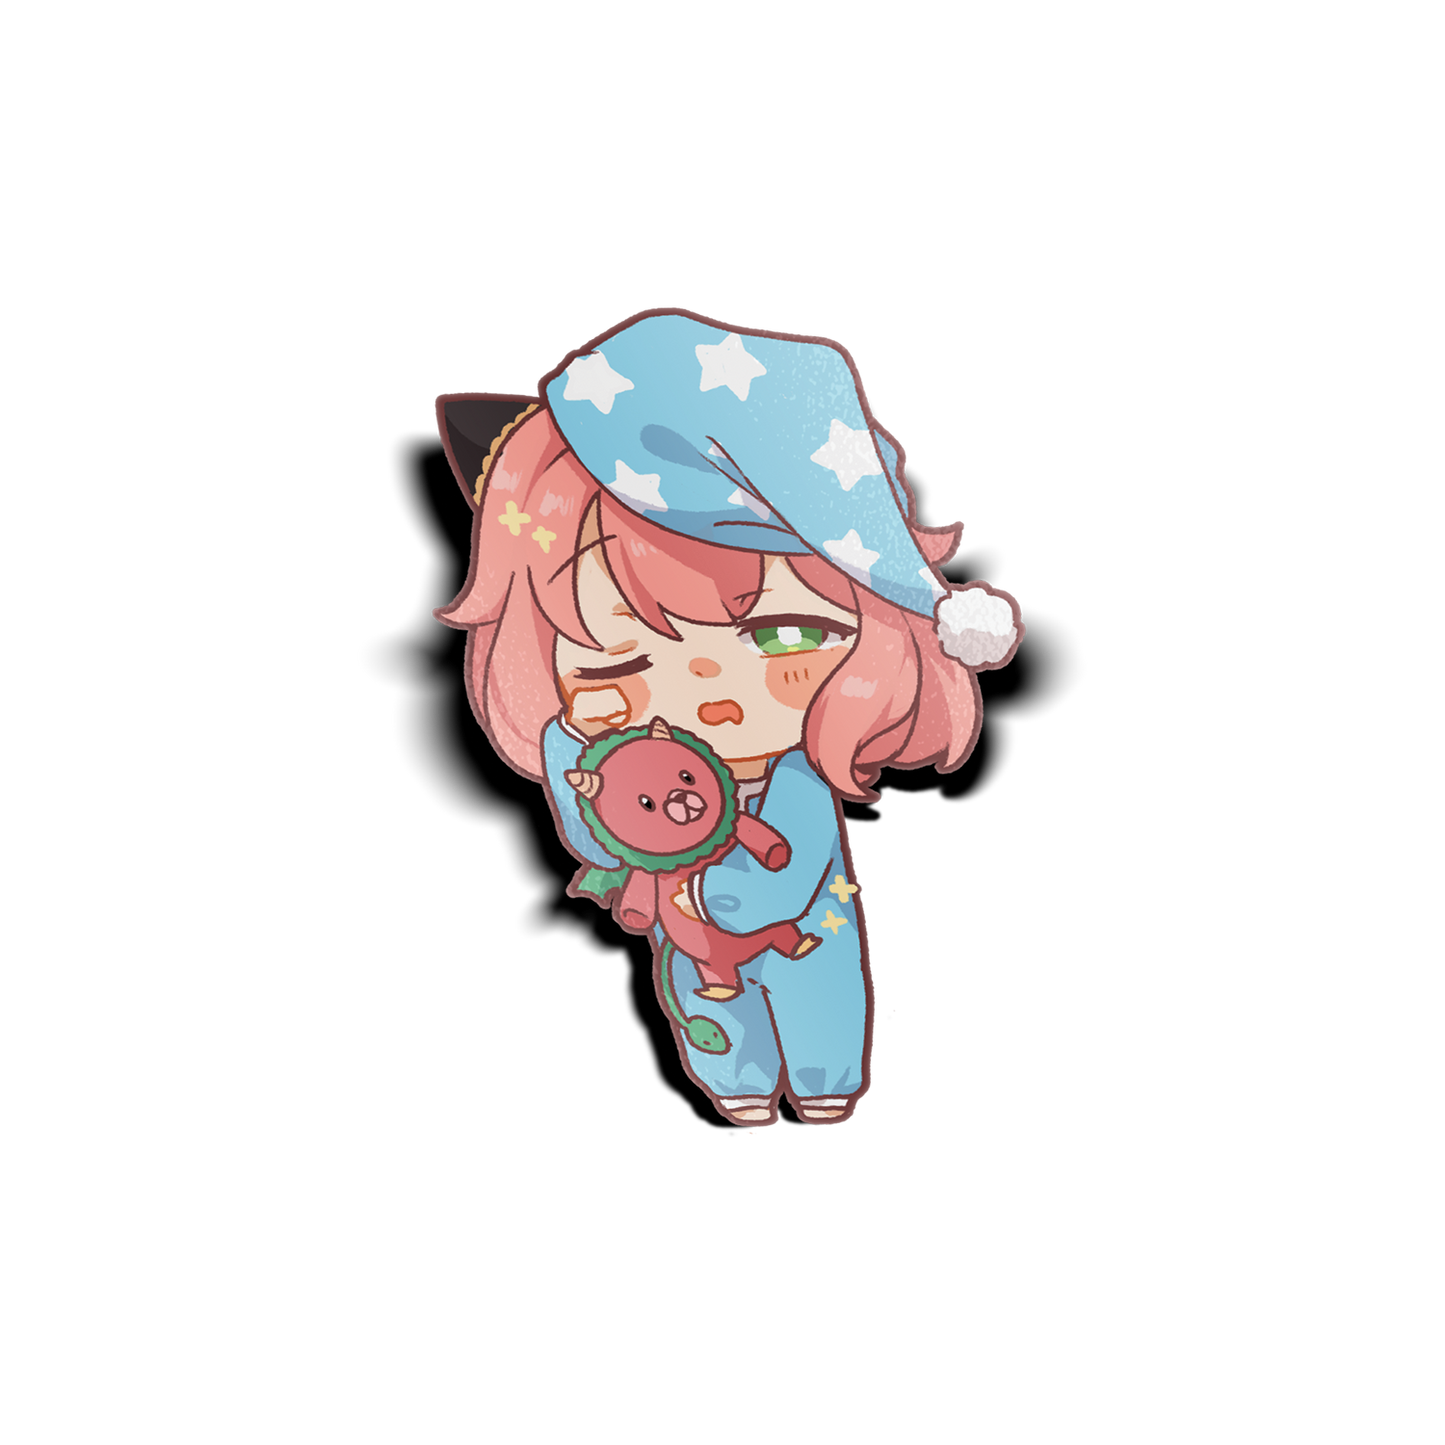 Sleepy Anya Mini Sticker design features Anya Forger from Spy x Family sleepy in pajamas, holding her chimera plushie.